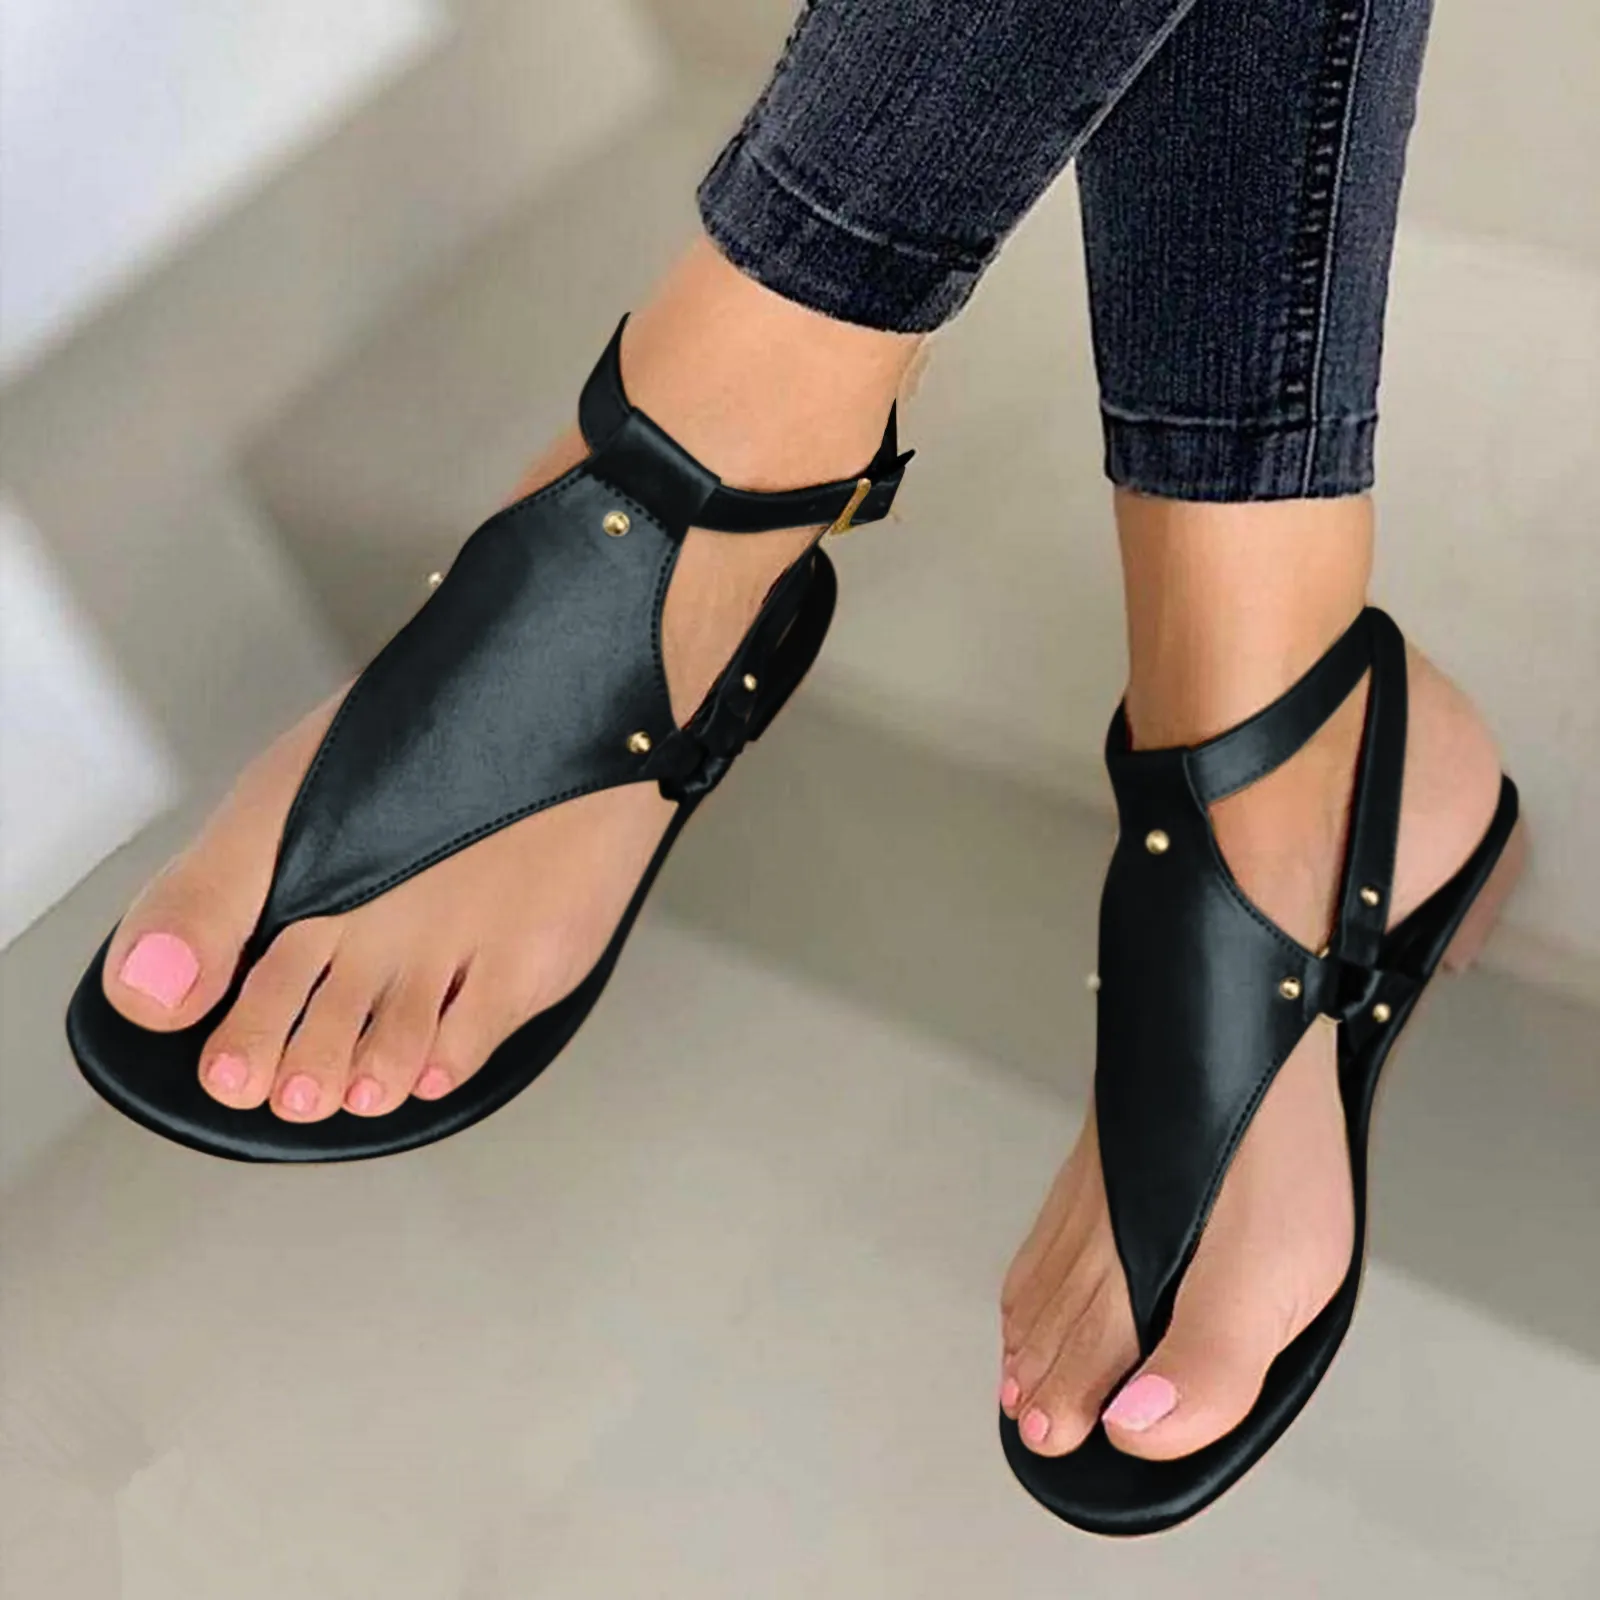 Sandals for Women Summer Casual Style Rhinestone Flat Set with Strap Open Toe Flip-Flop Breathable Slim Roman Shoes 